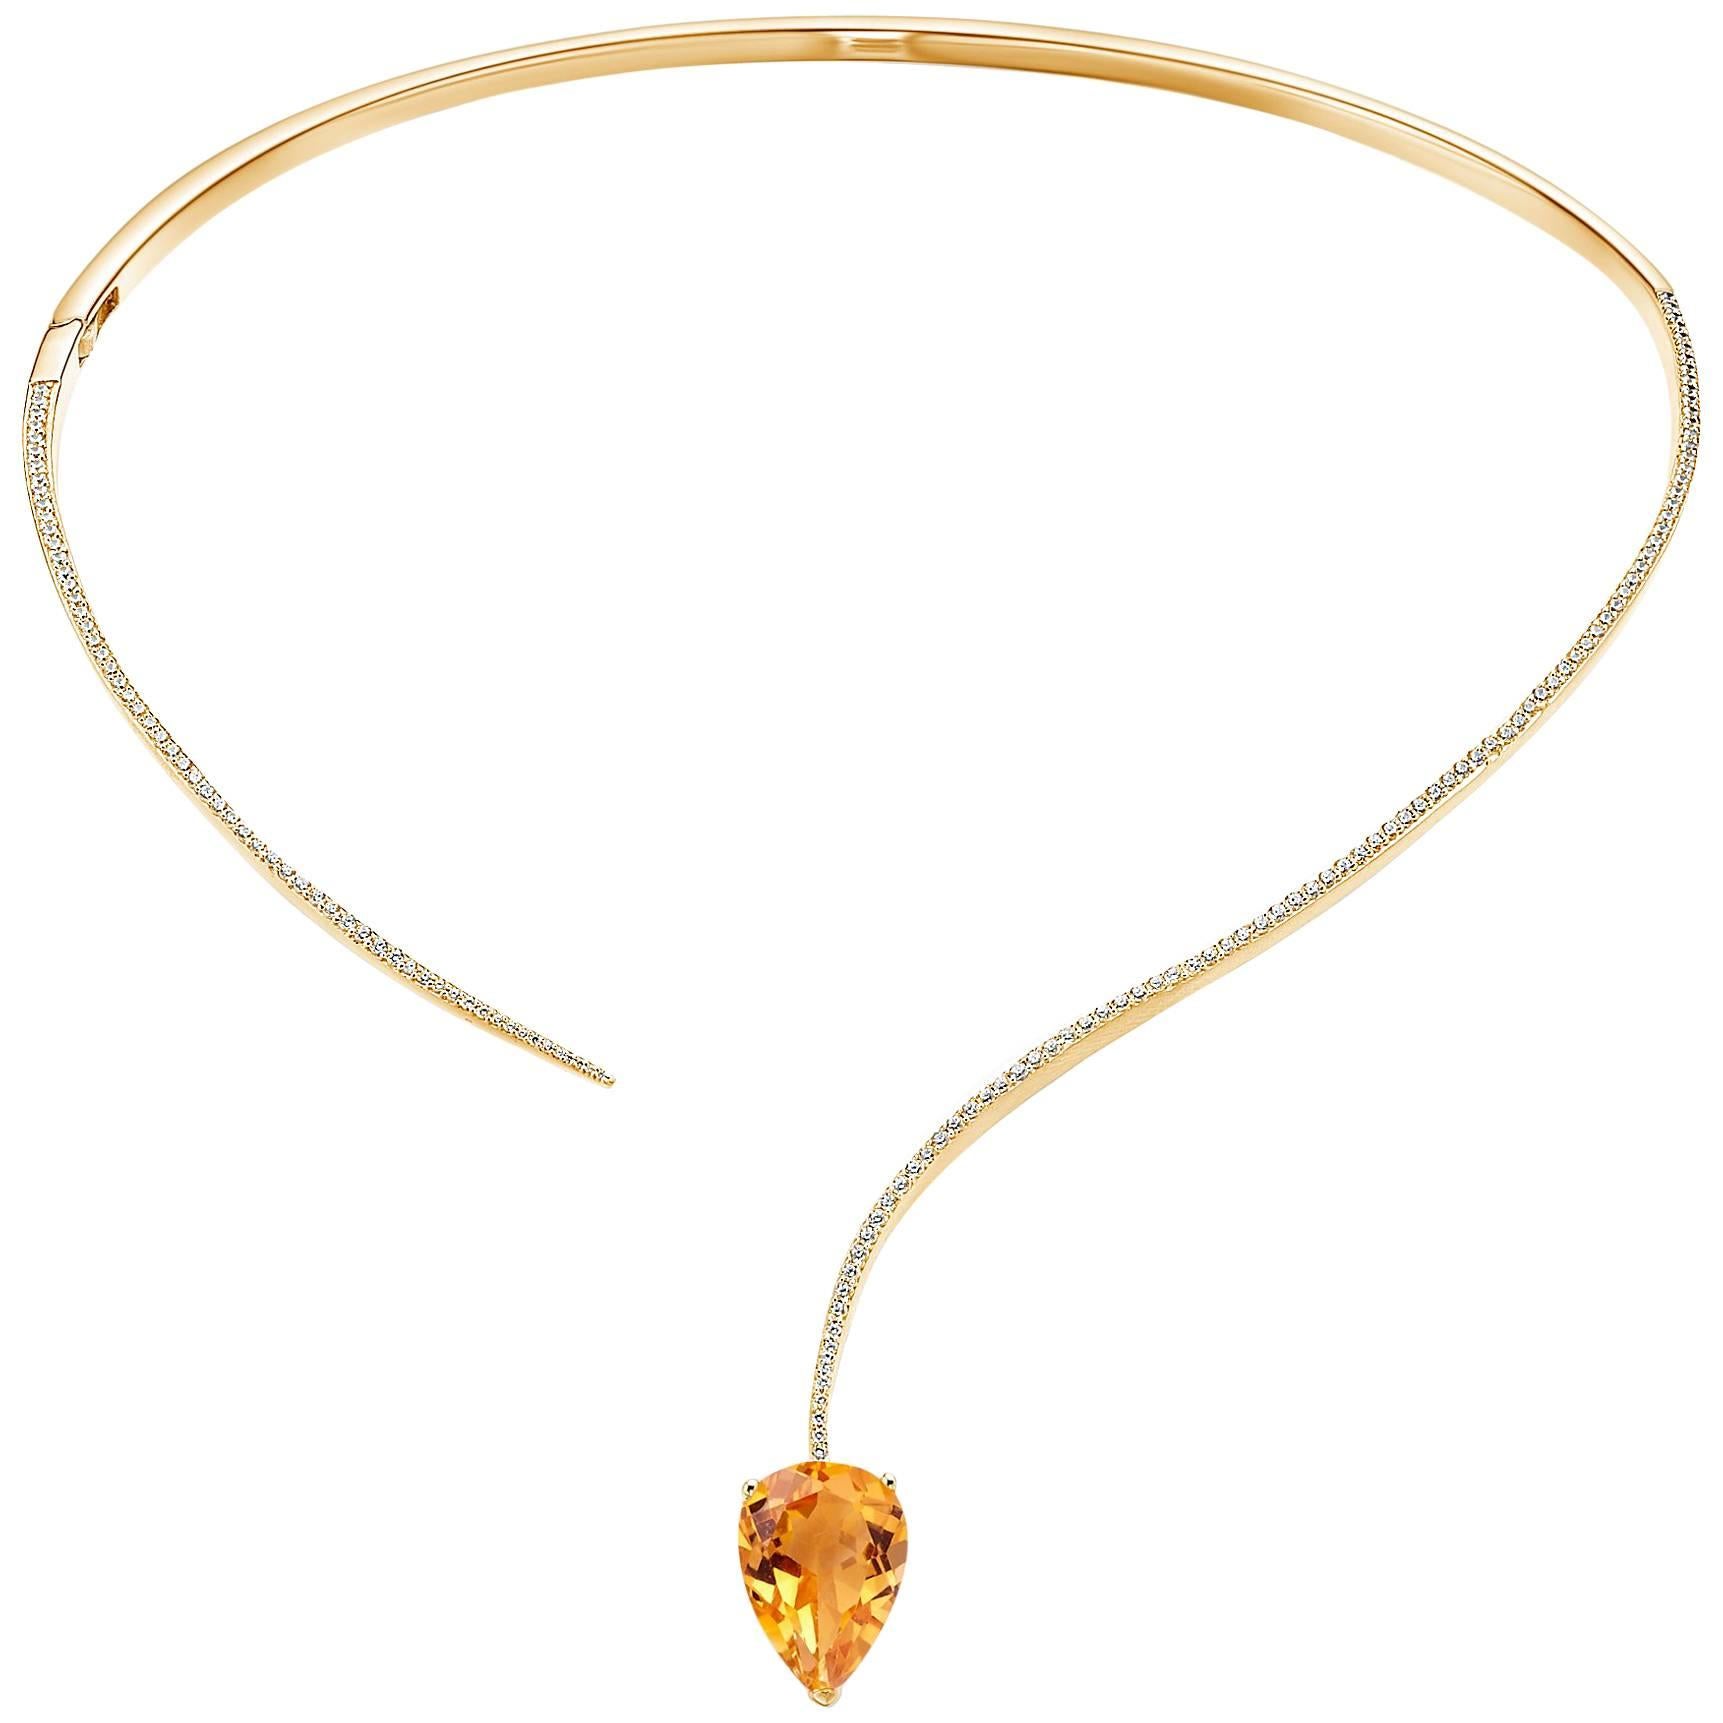 Fei Liu Shooting Star Yellow Citrine and Cubic Zirconia Silver Choker Necklace